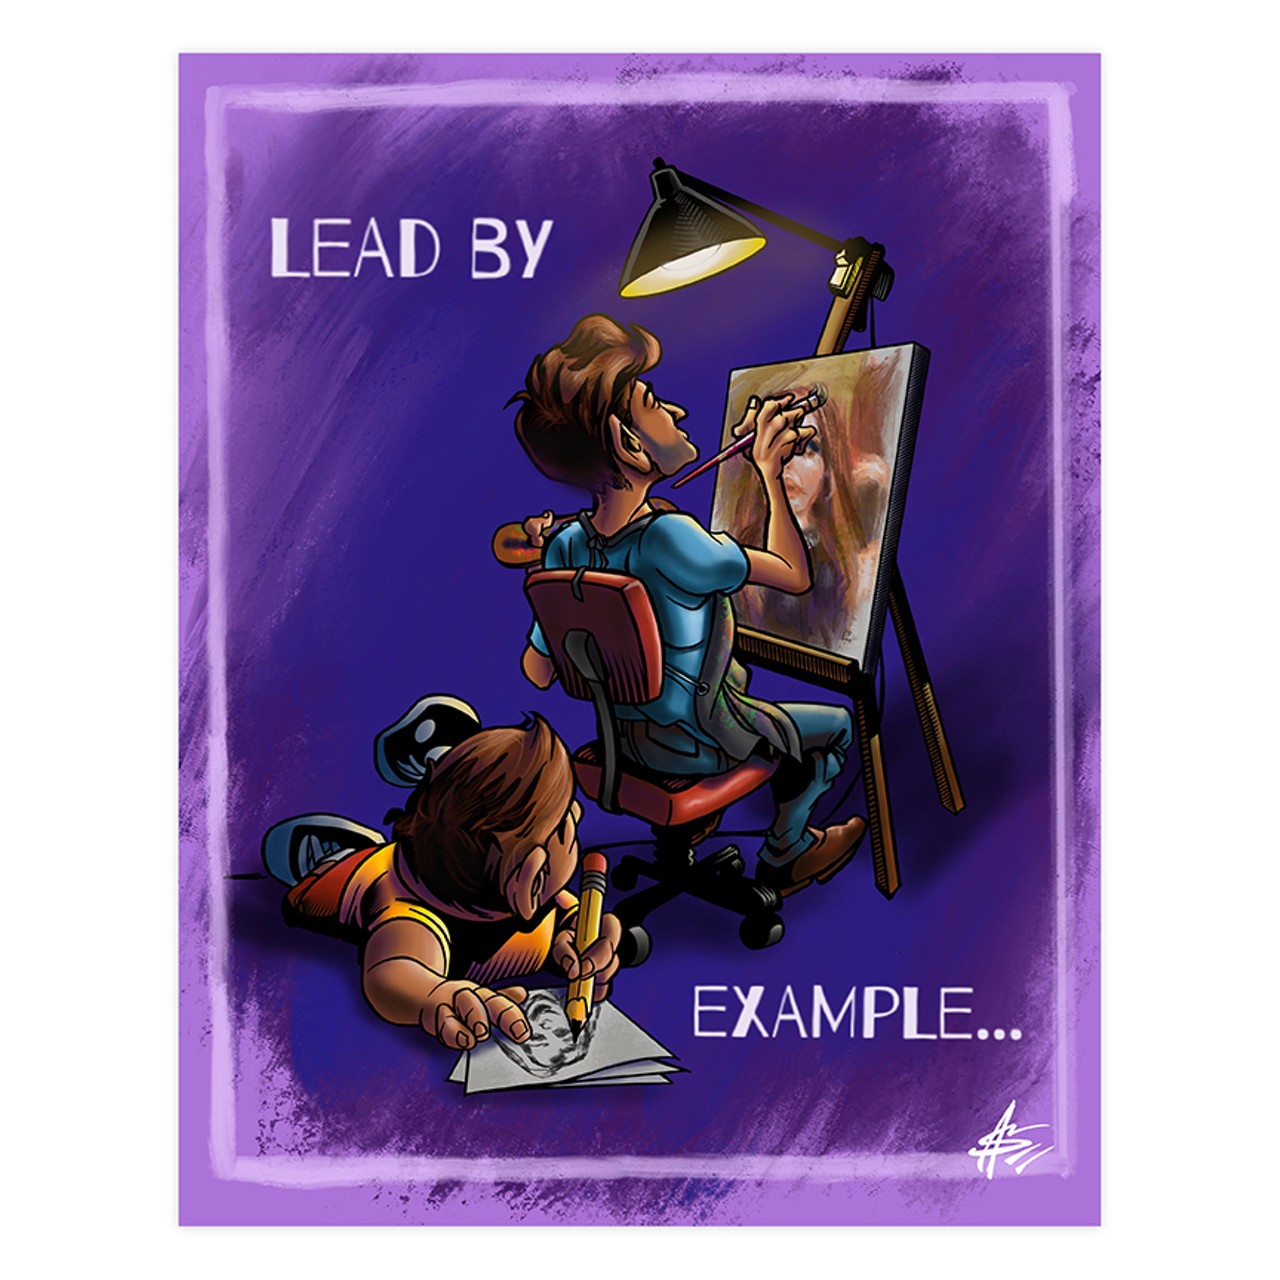 "Lead By Example" by Paul Garson